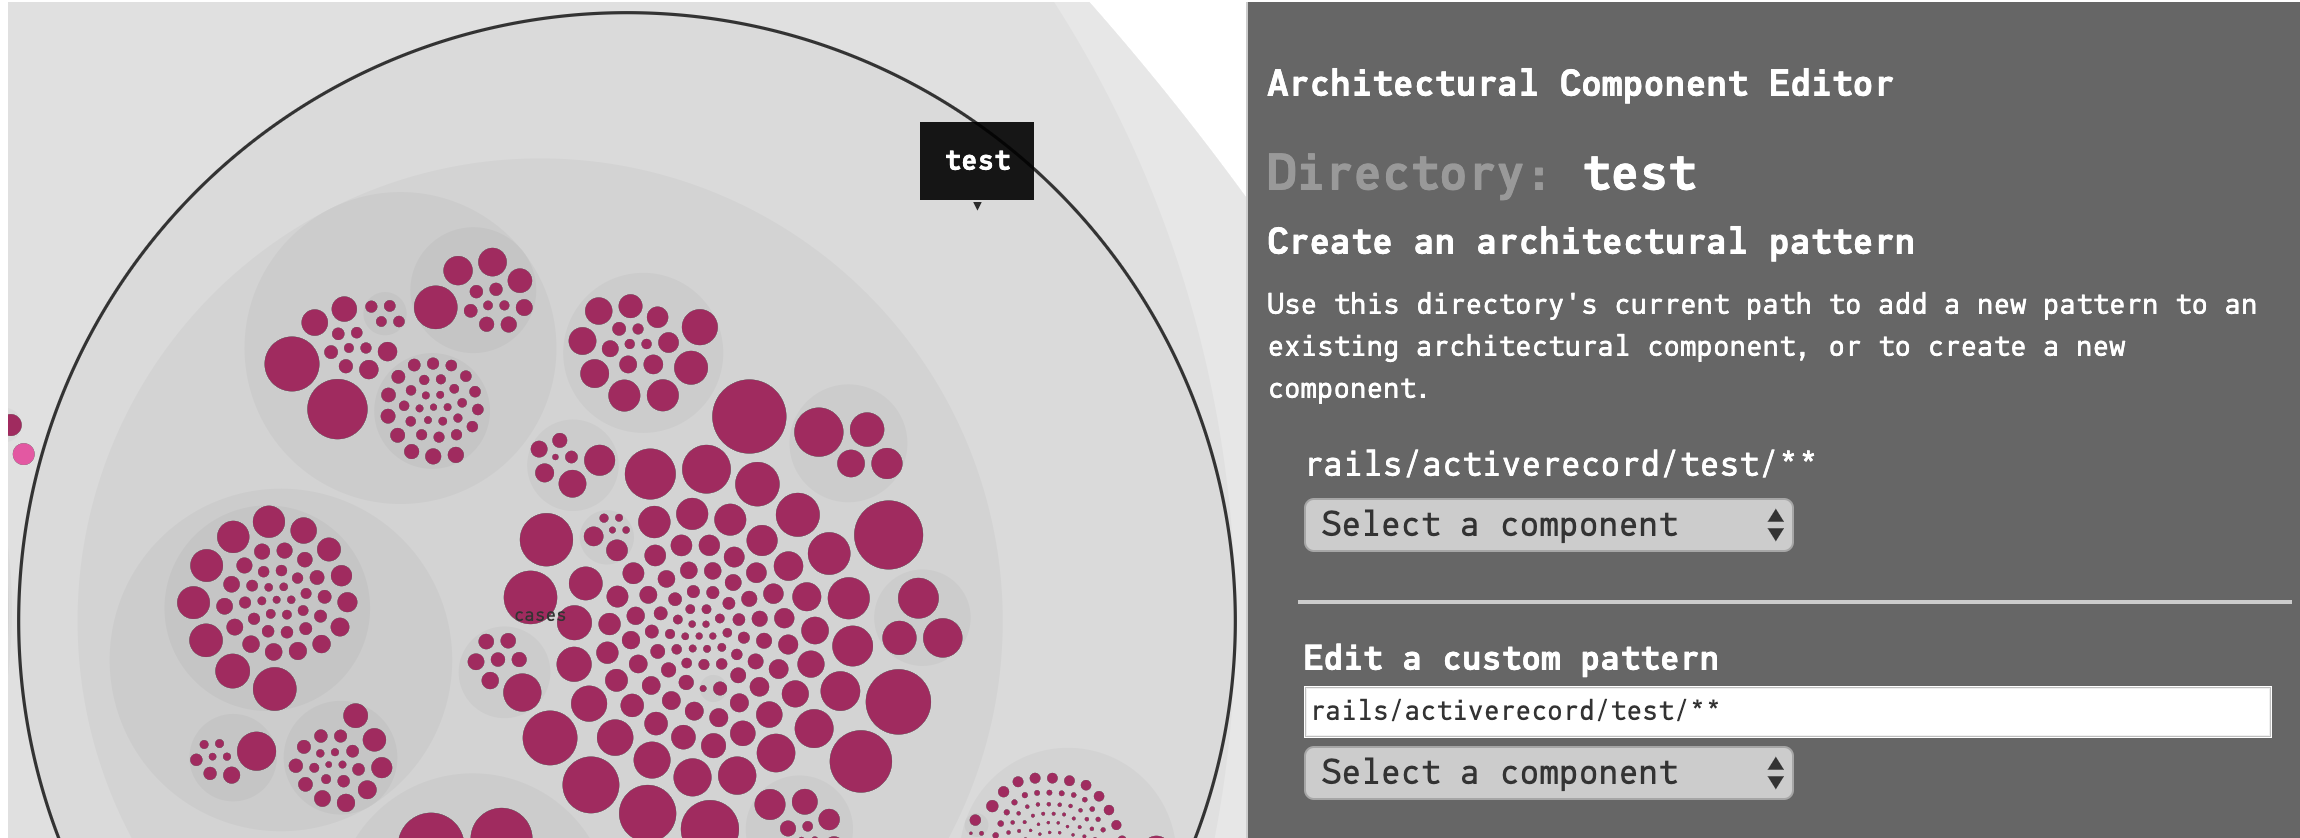 Zooming in on a directory in the architectural component editor.